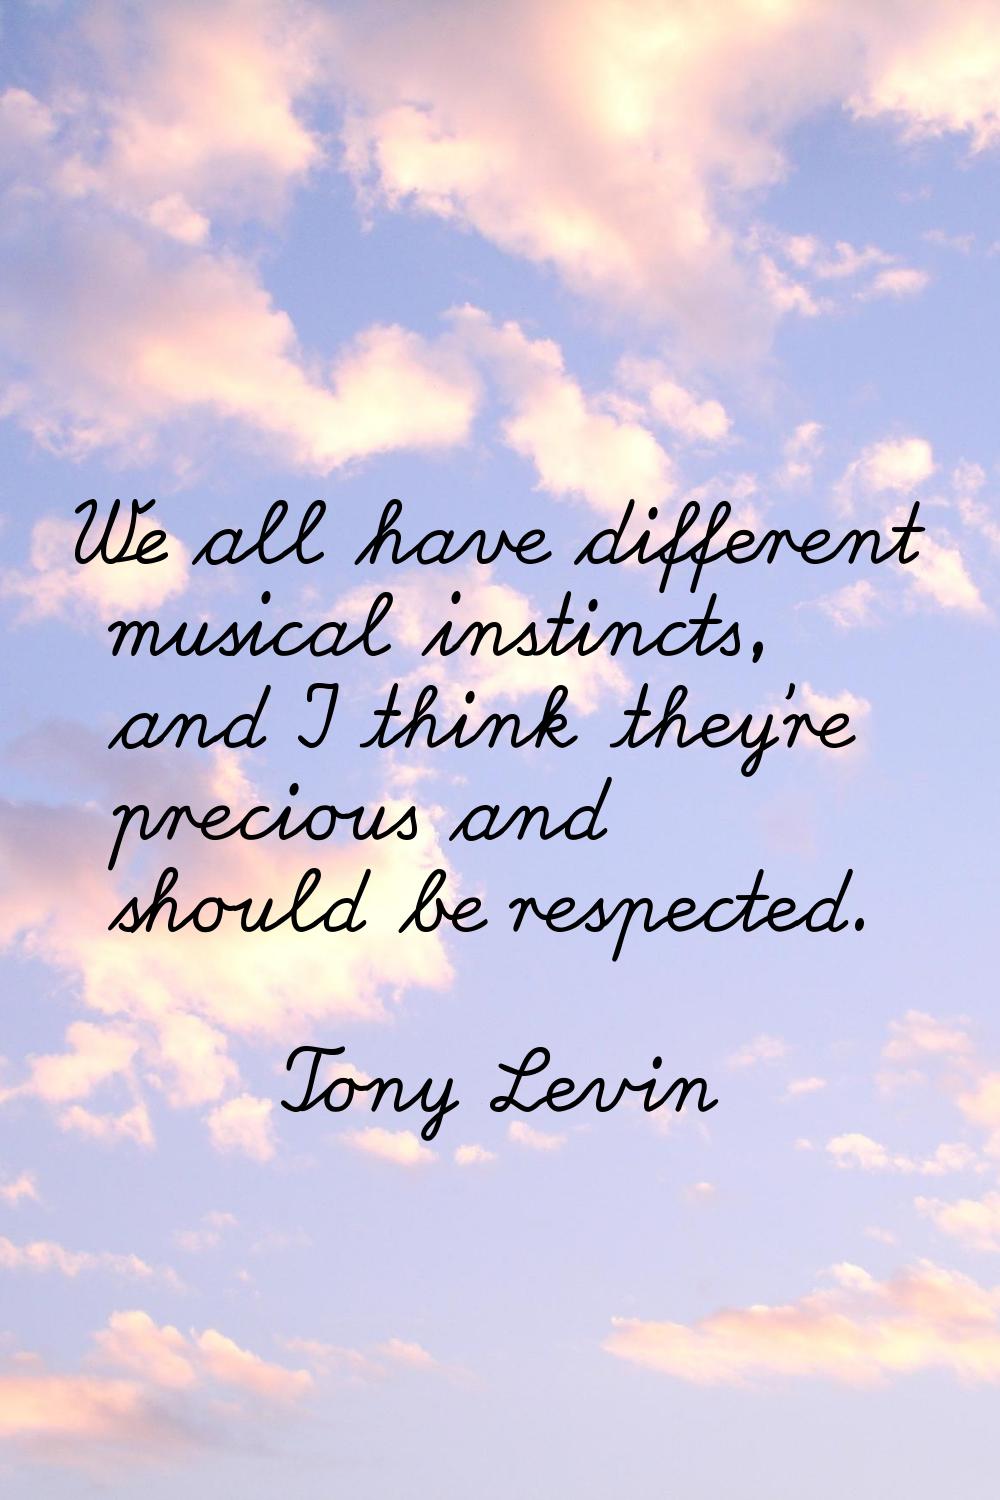 We all have different musical instincts, and I think they're precious and should be respected.